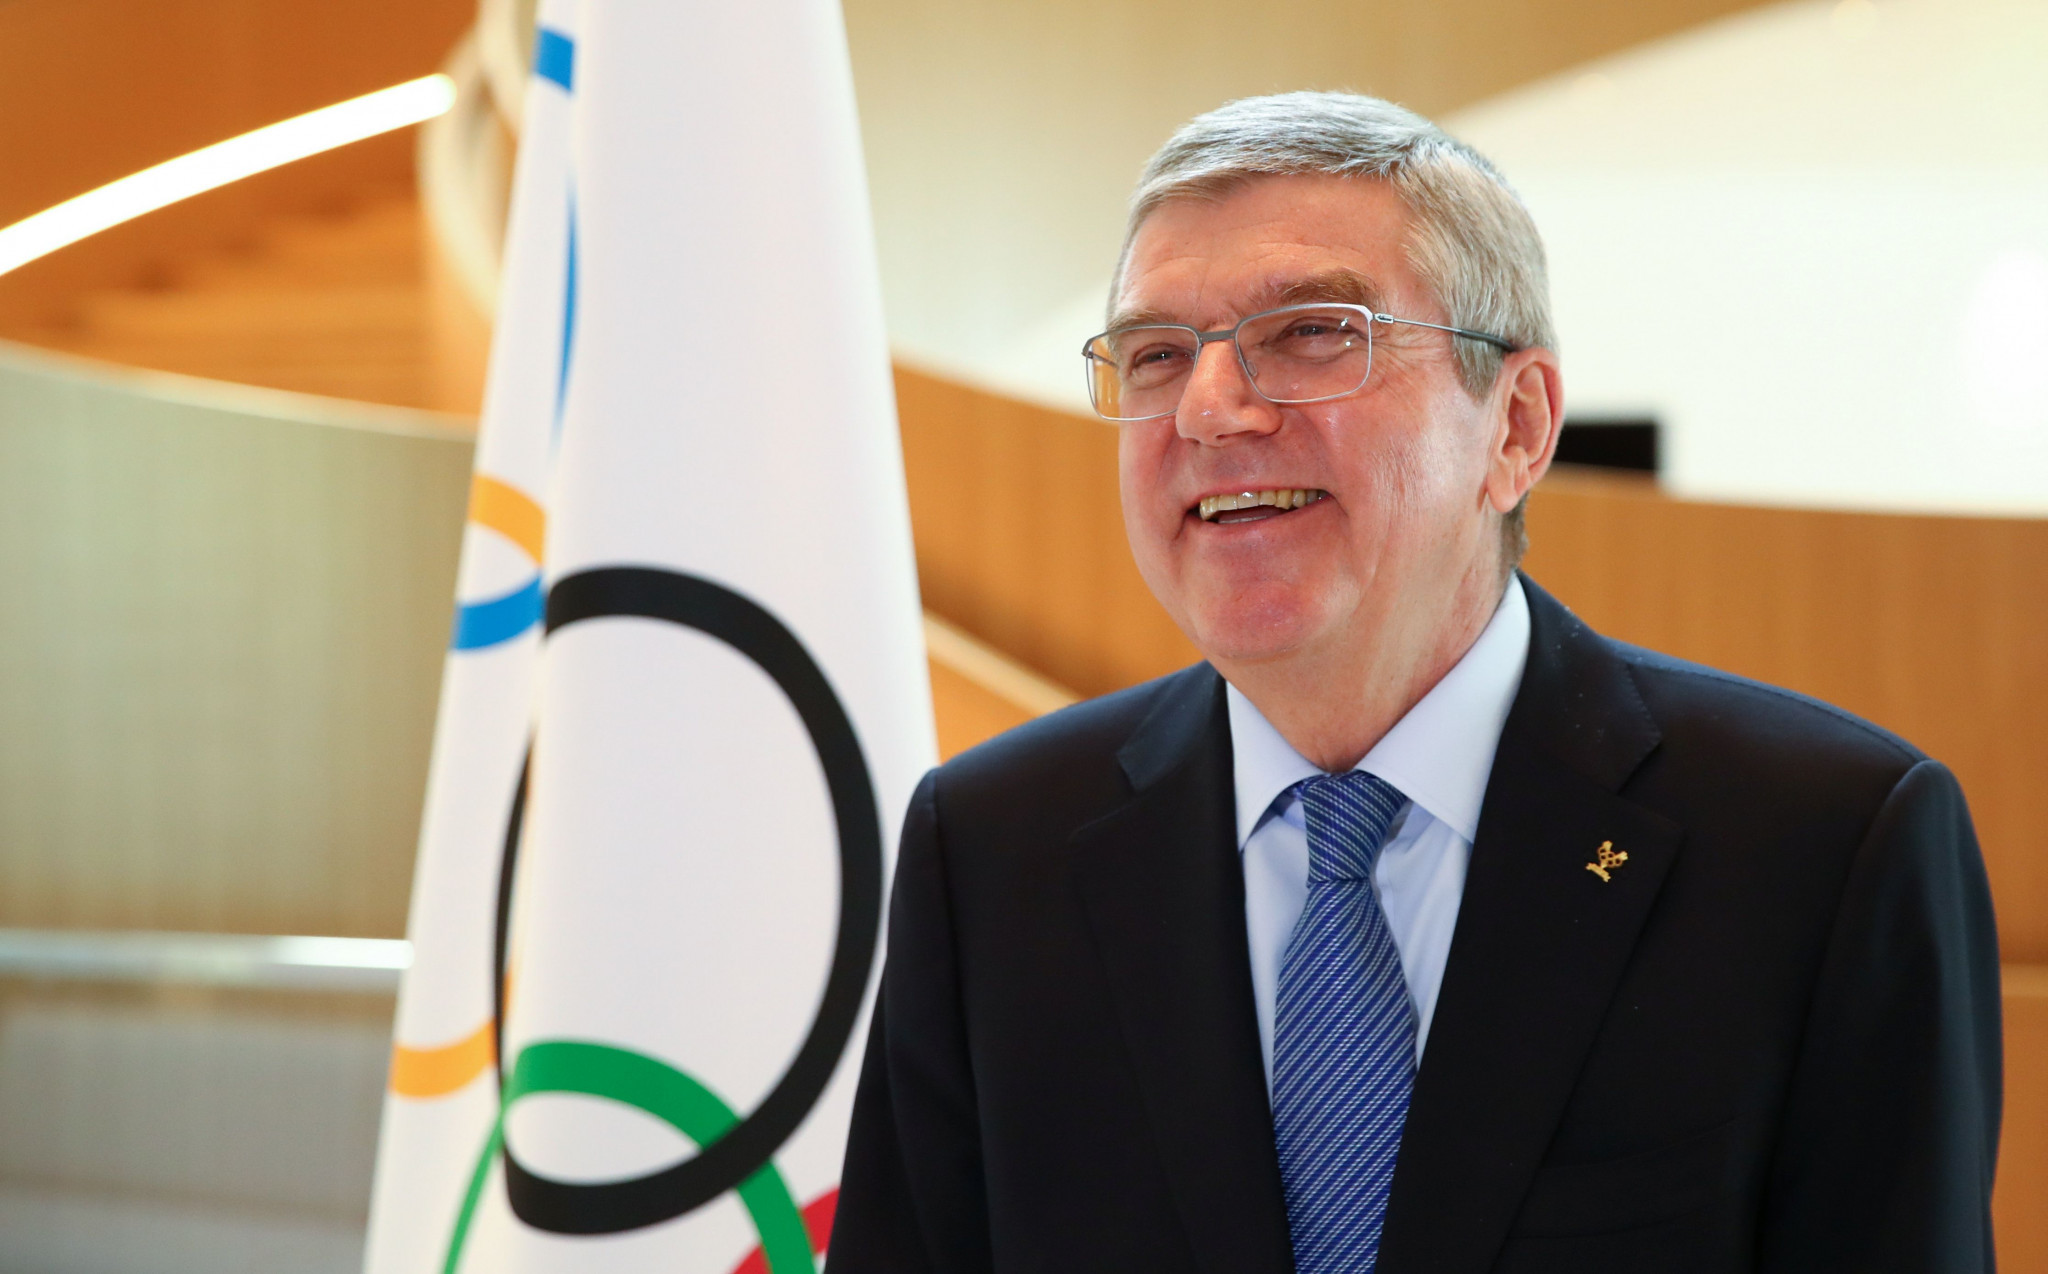 Bach records video message to celebrate "very different" Olympic Day